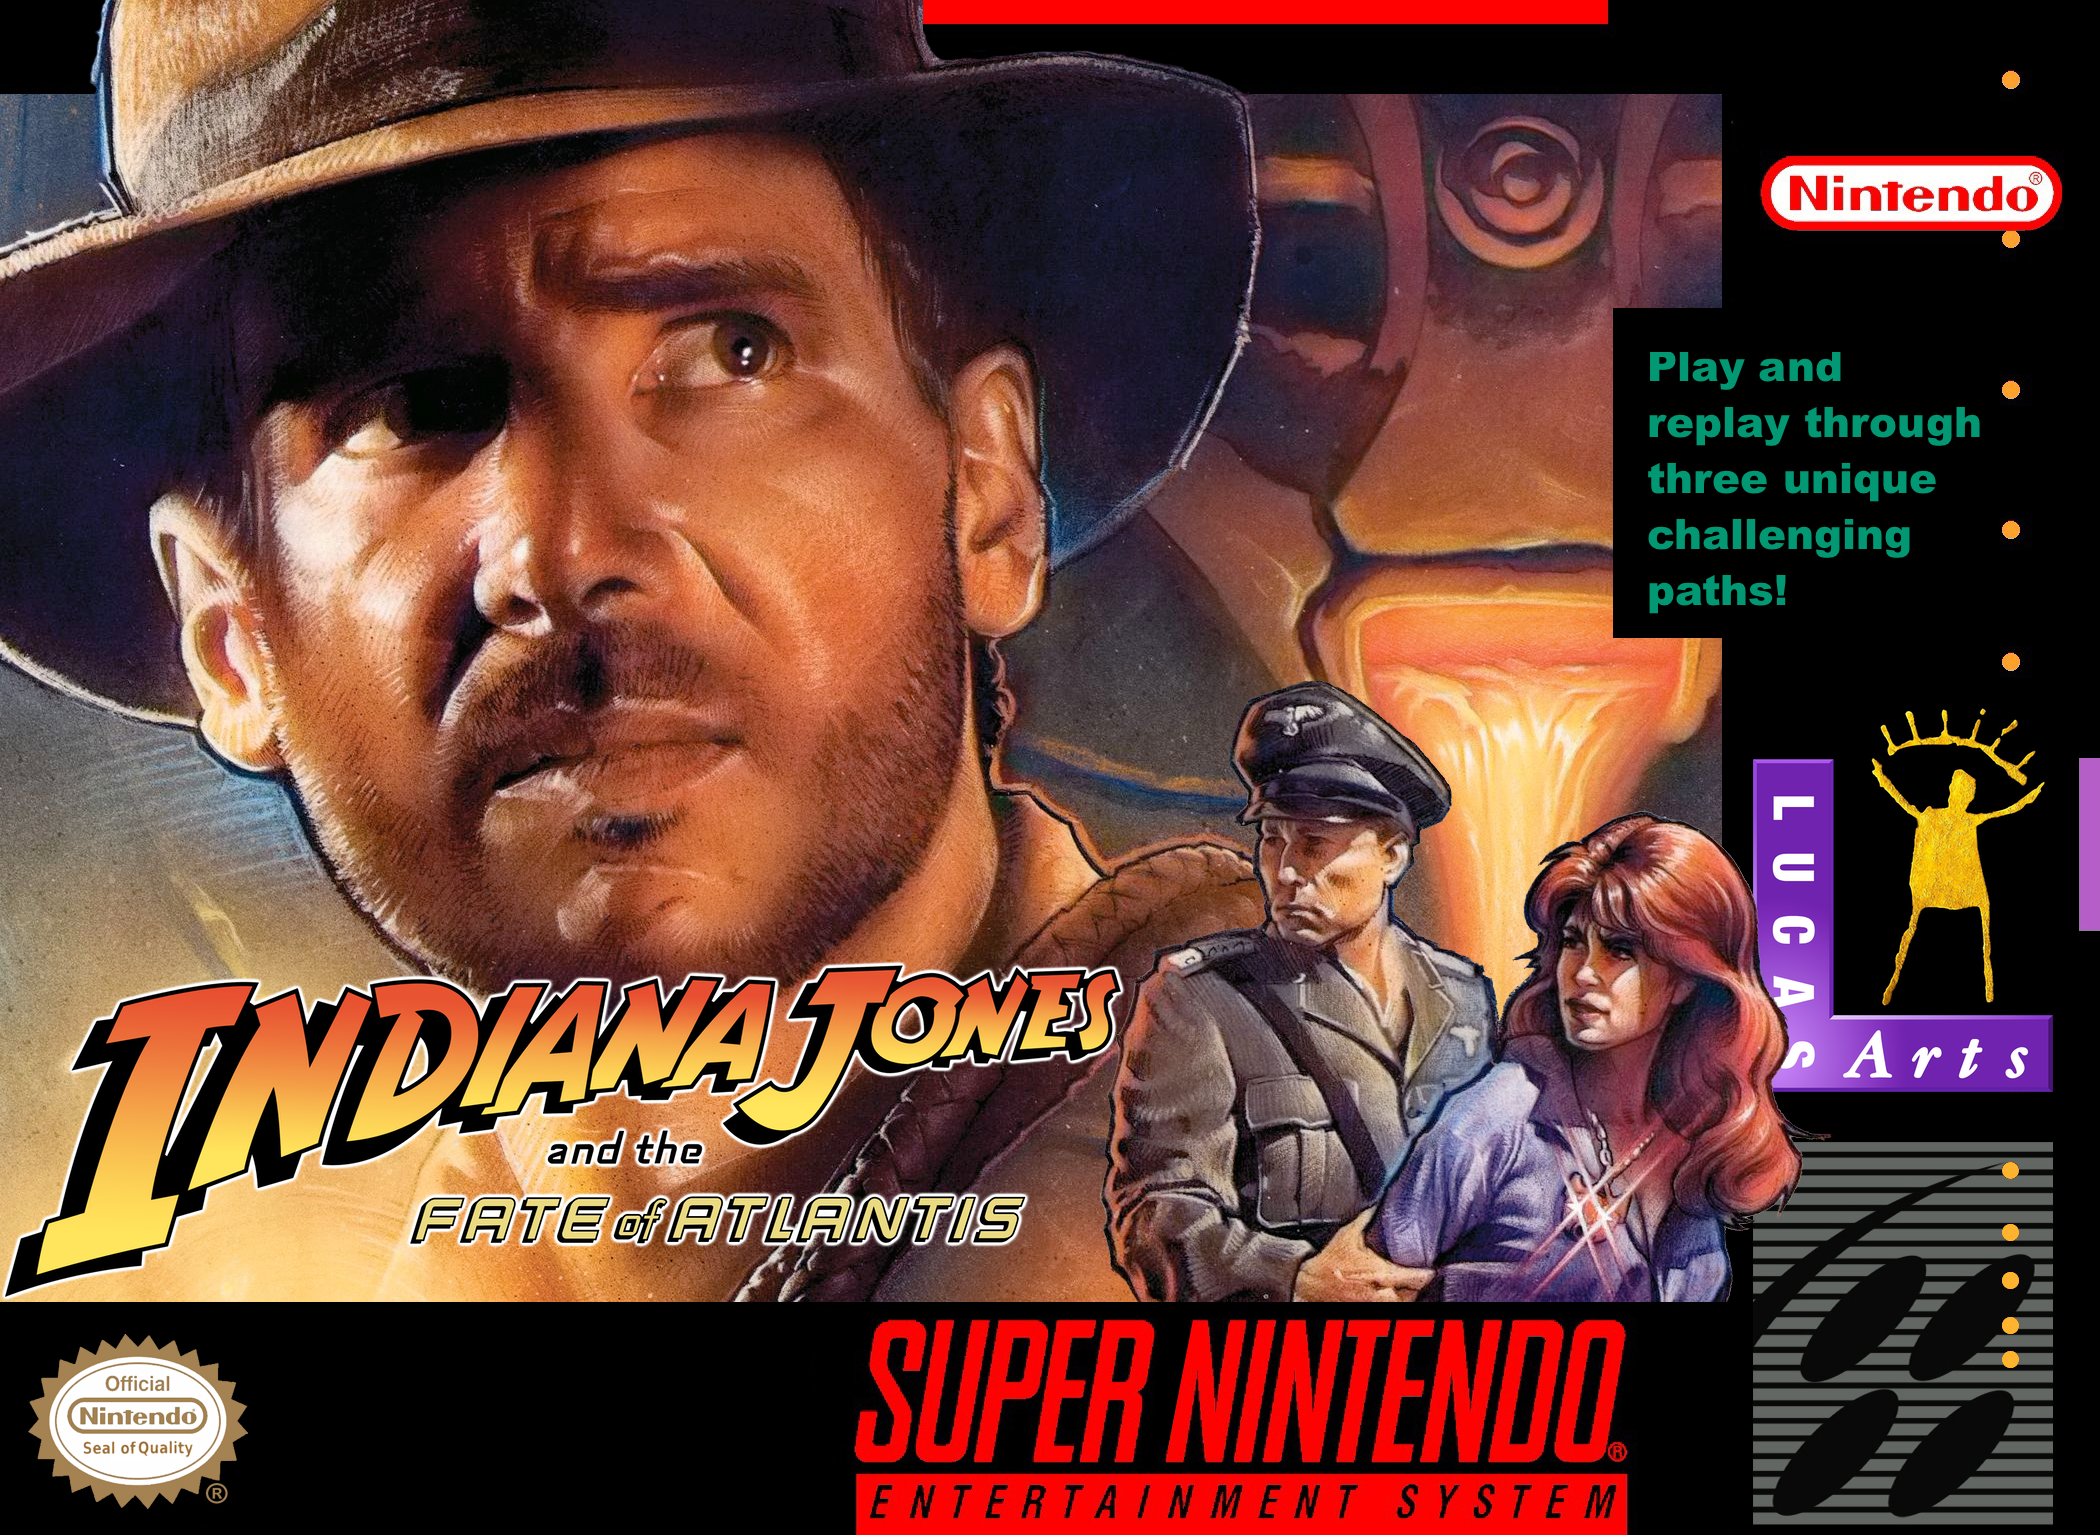 Indiana Jones and the Fate of Atlantis for the Super Nintendo Entertainment System.